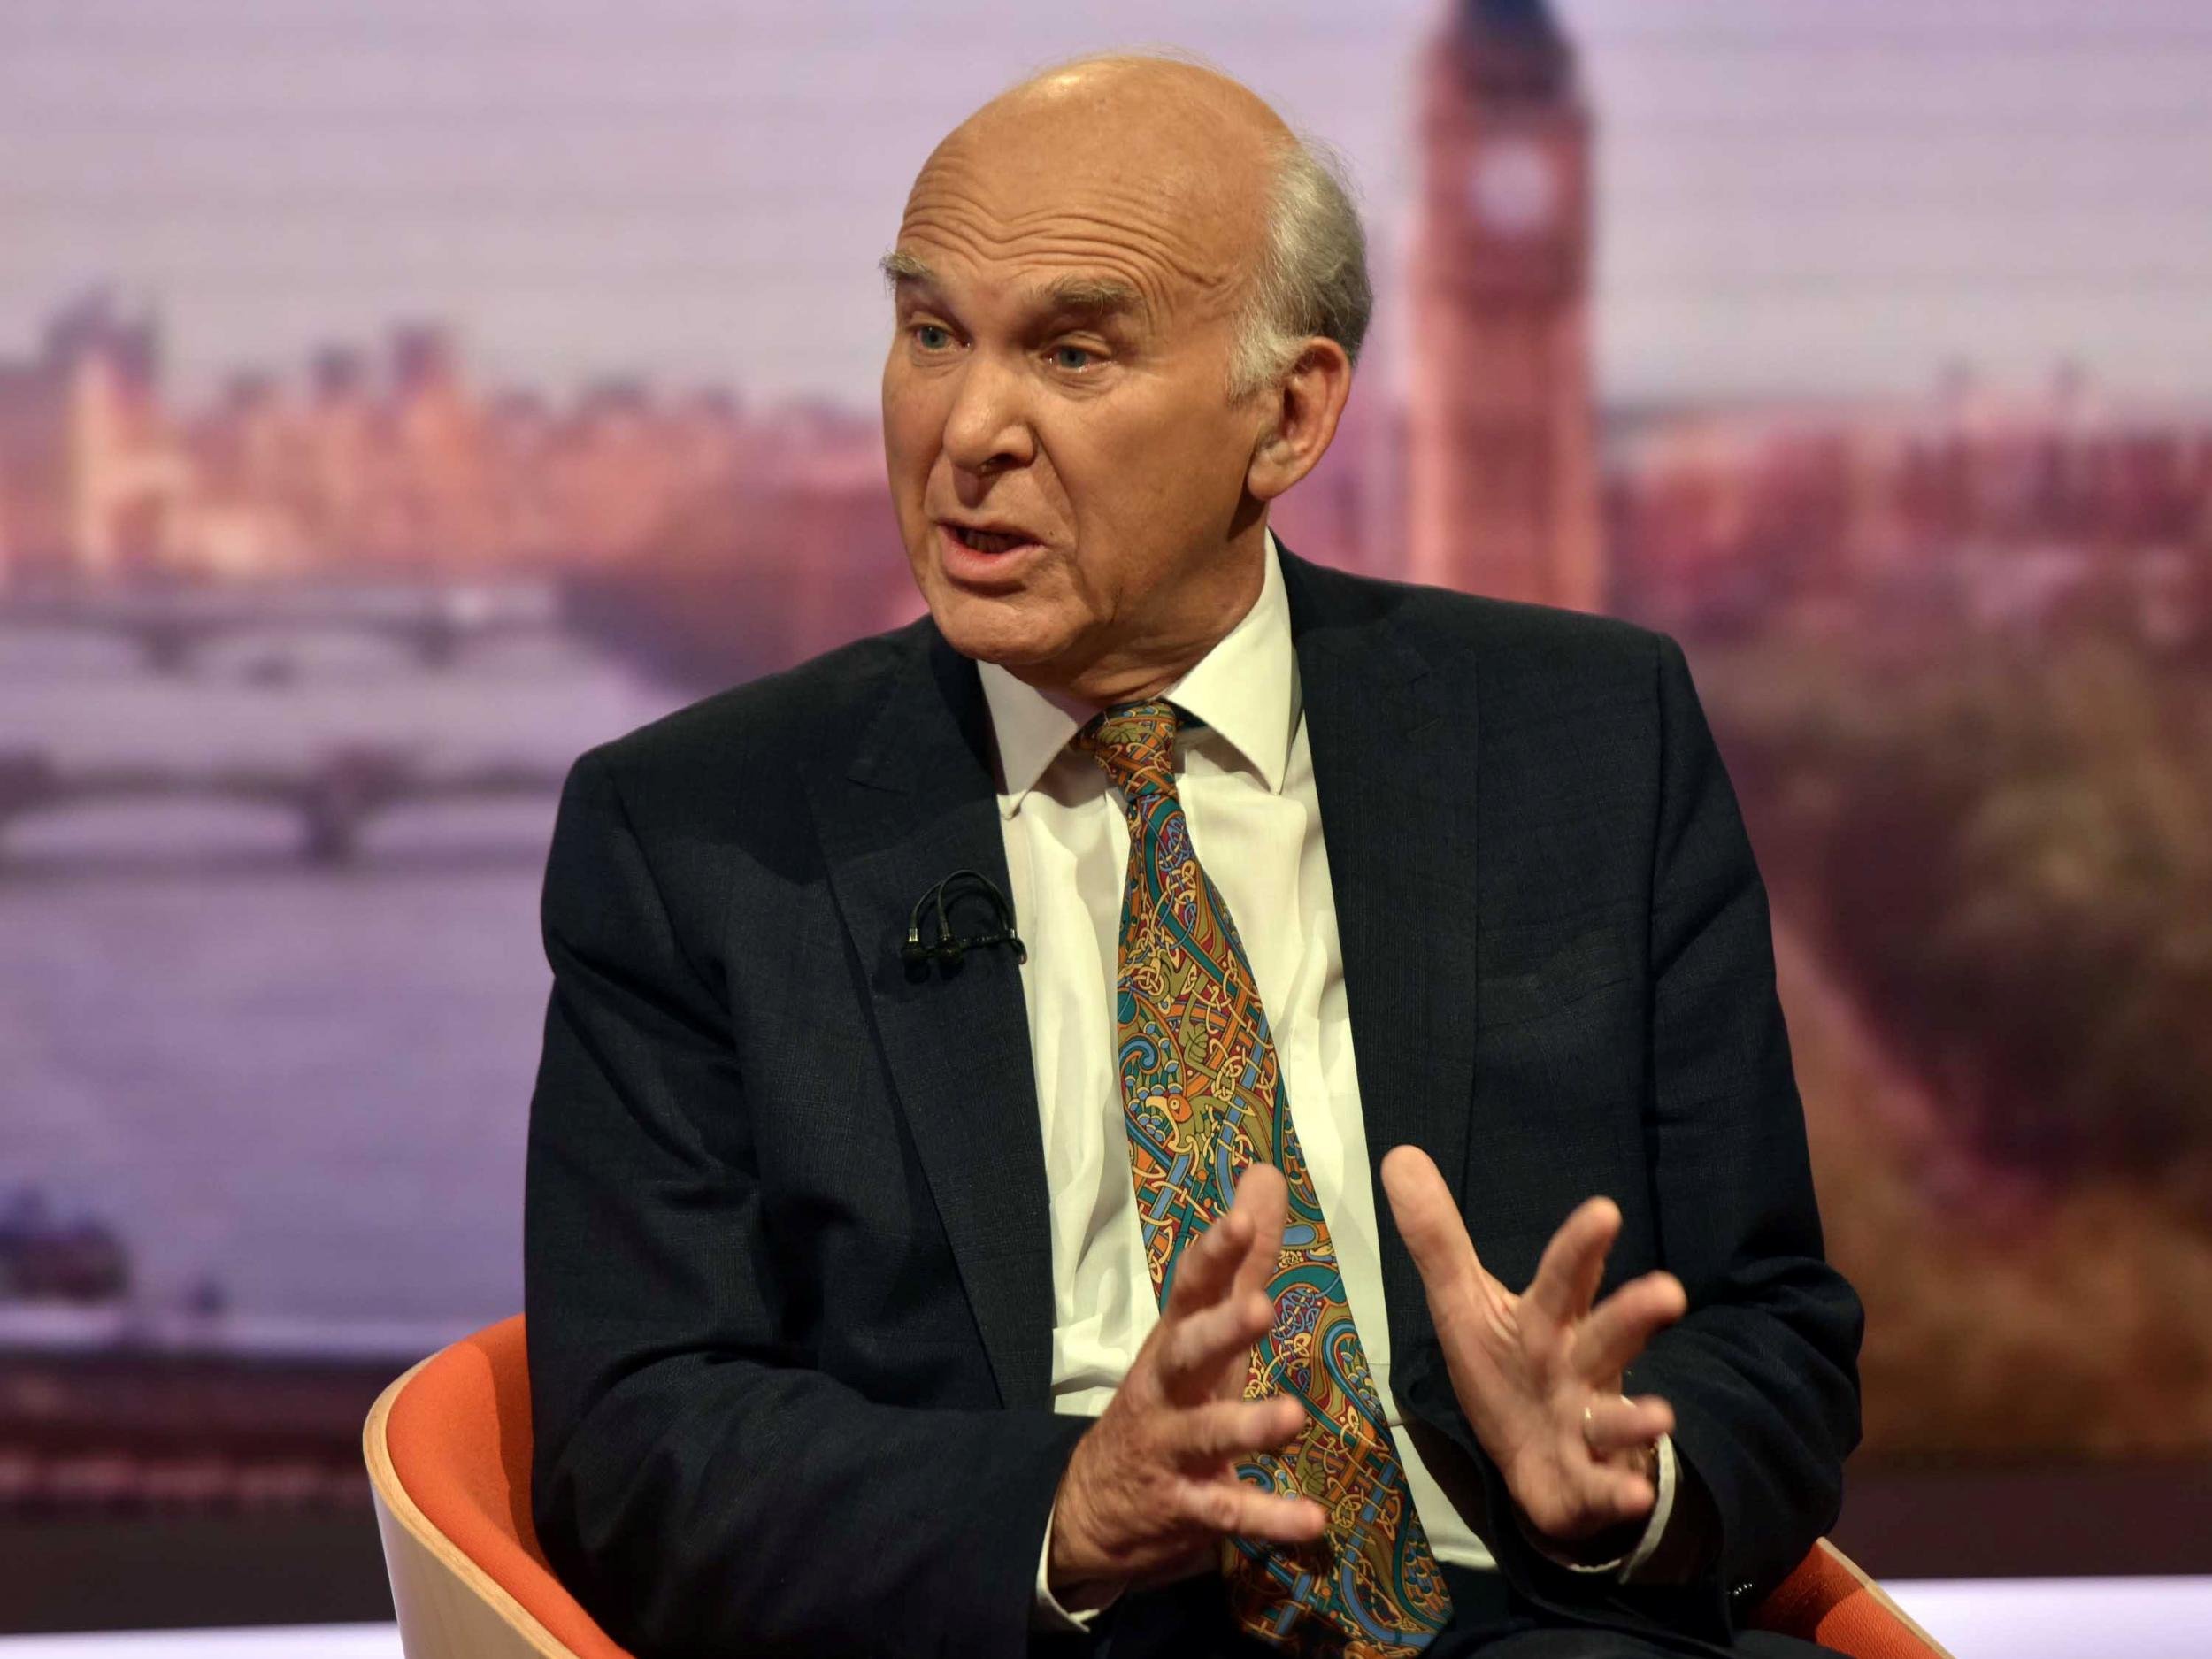 The leader of the Liberal Democrats revealed his prime-ministerial ambitions on ‘The Andrew Marr Show’ at the weekend